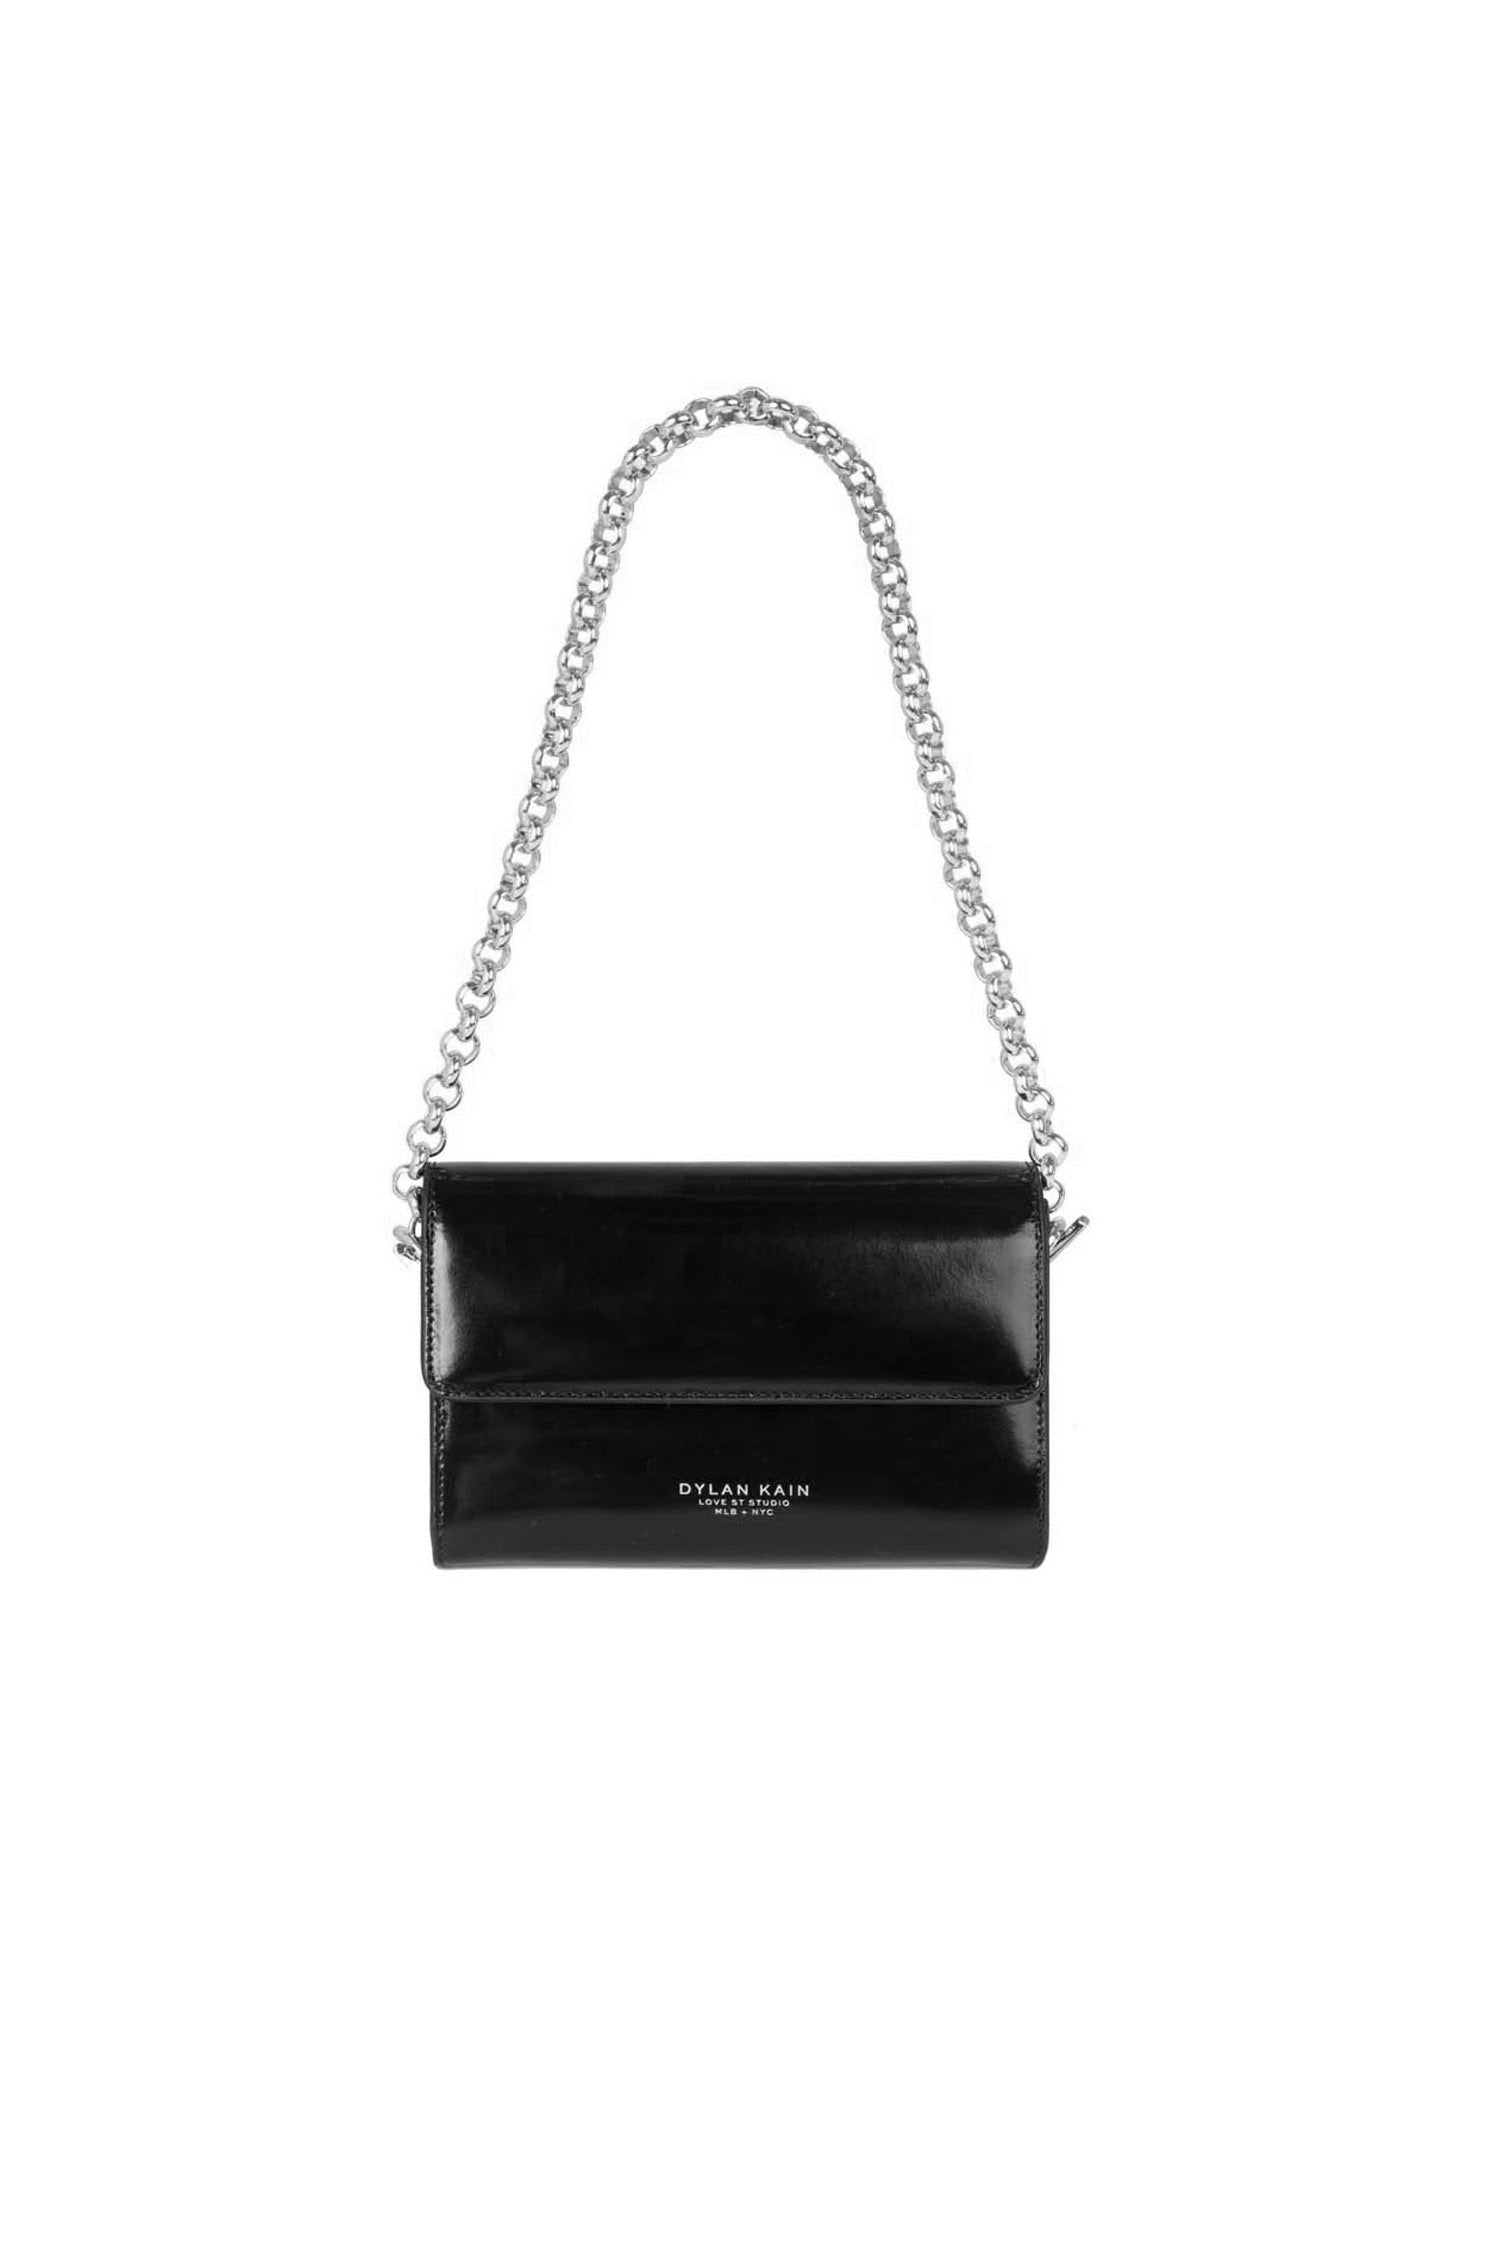 The Juicy Patent Wallet Black Silver